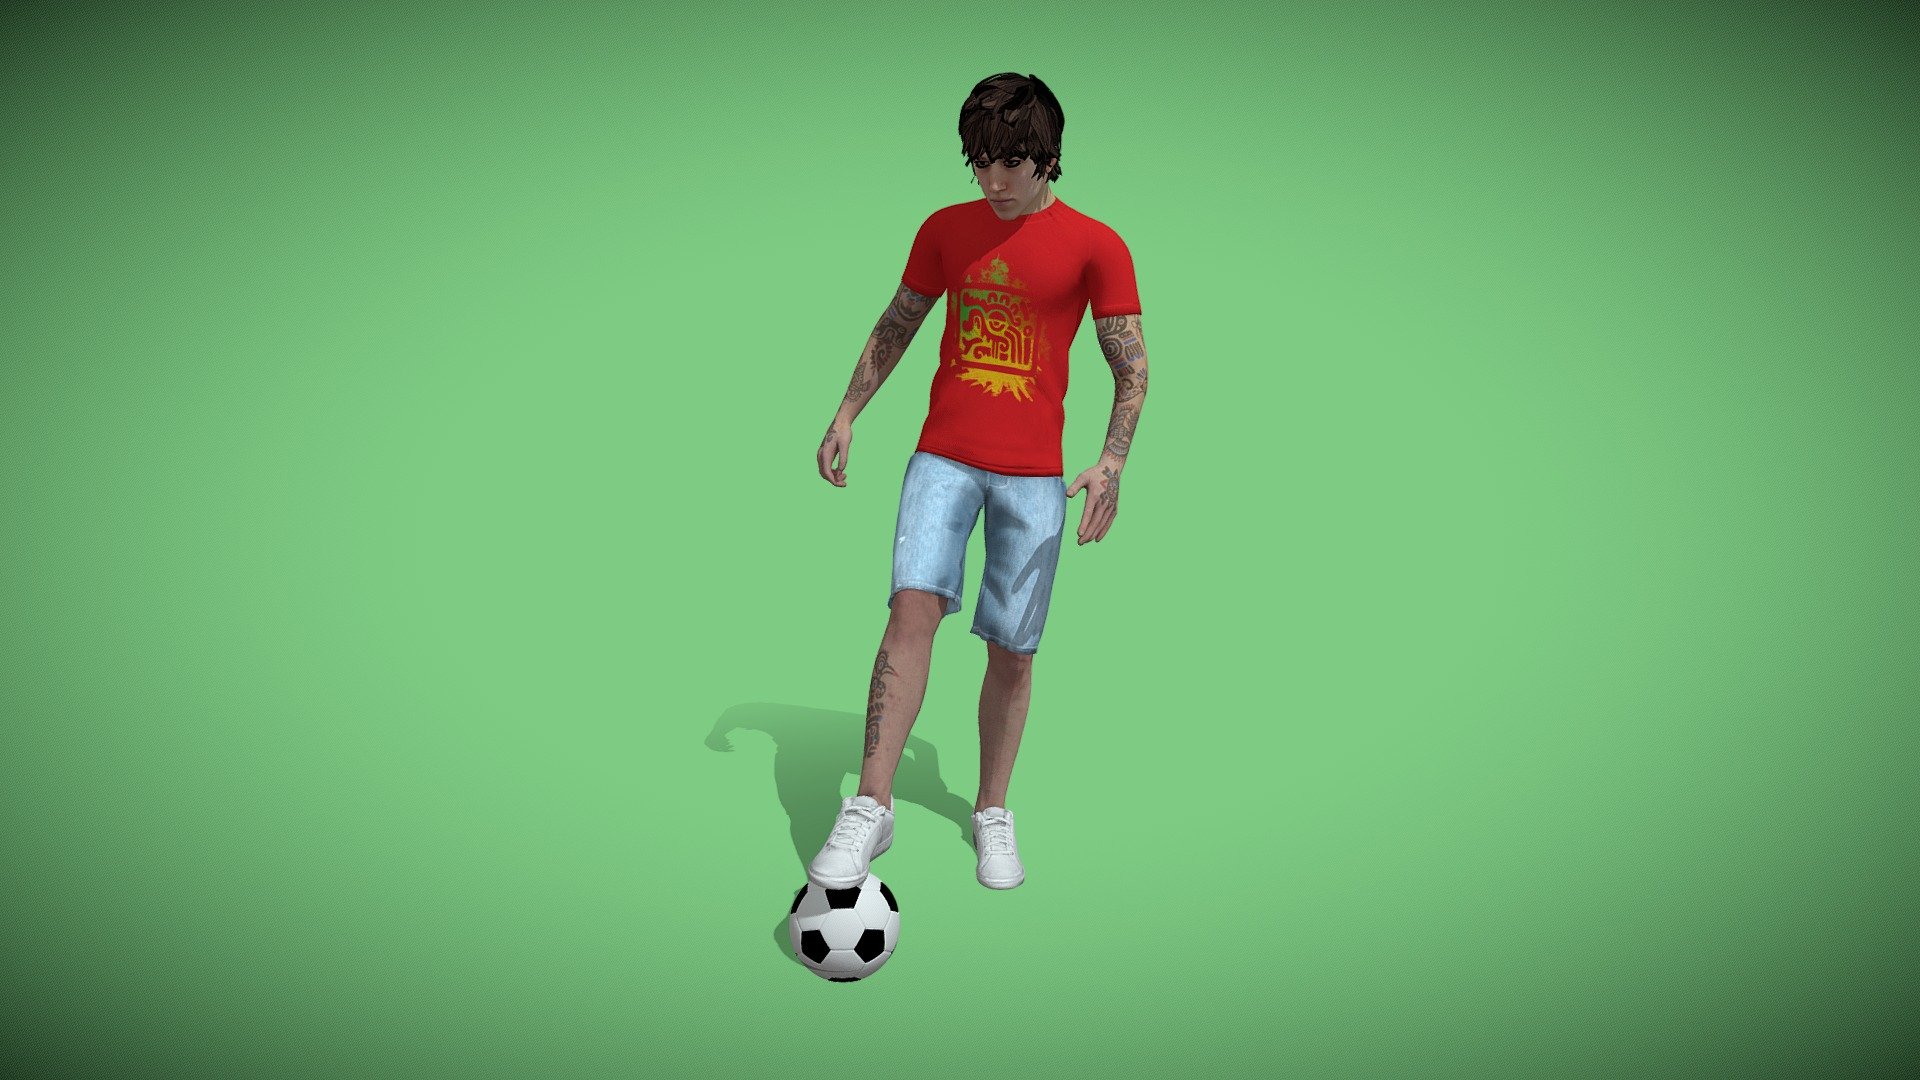 Soccer player during pre-game warm-up, with soccer ball (football), in this looping animation.

See this 3D model in action, and more models like it, here in this collection of free augmeneted reality apps:

https://morpheusar.com/ - Animated Soccer (Football) Player Warm-up - 3D model by LasquetiSpice 3d model